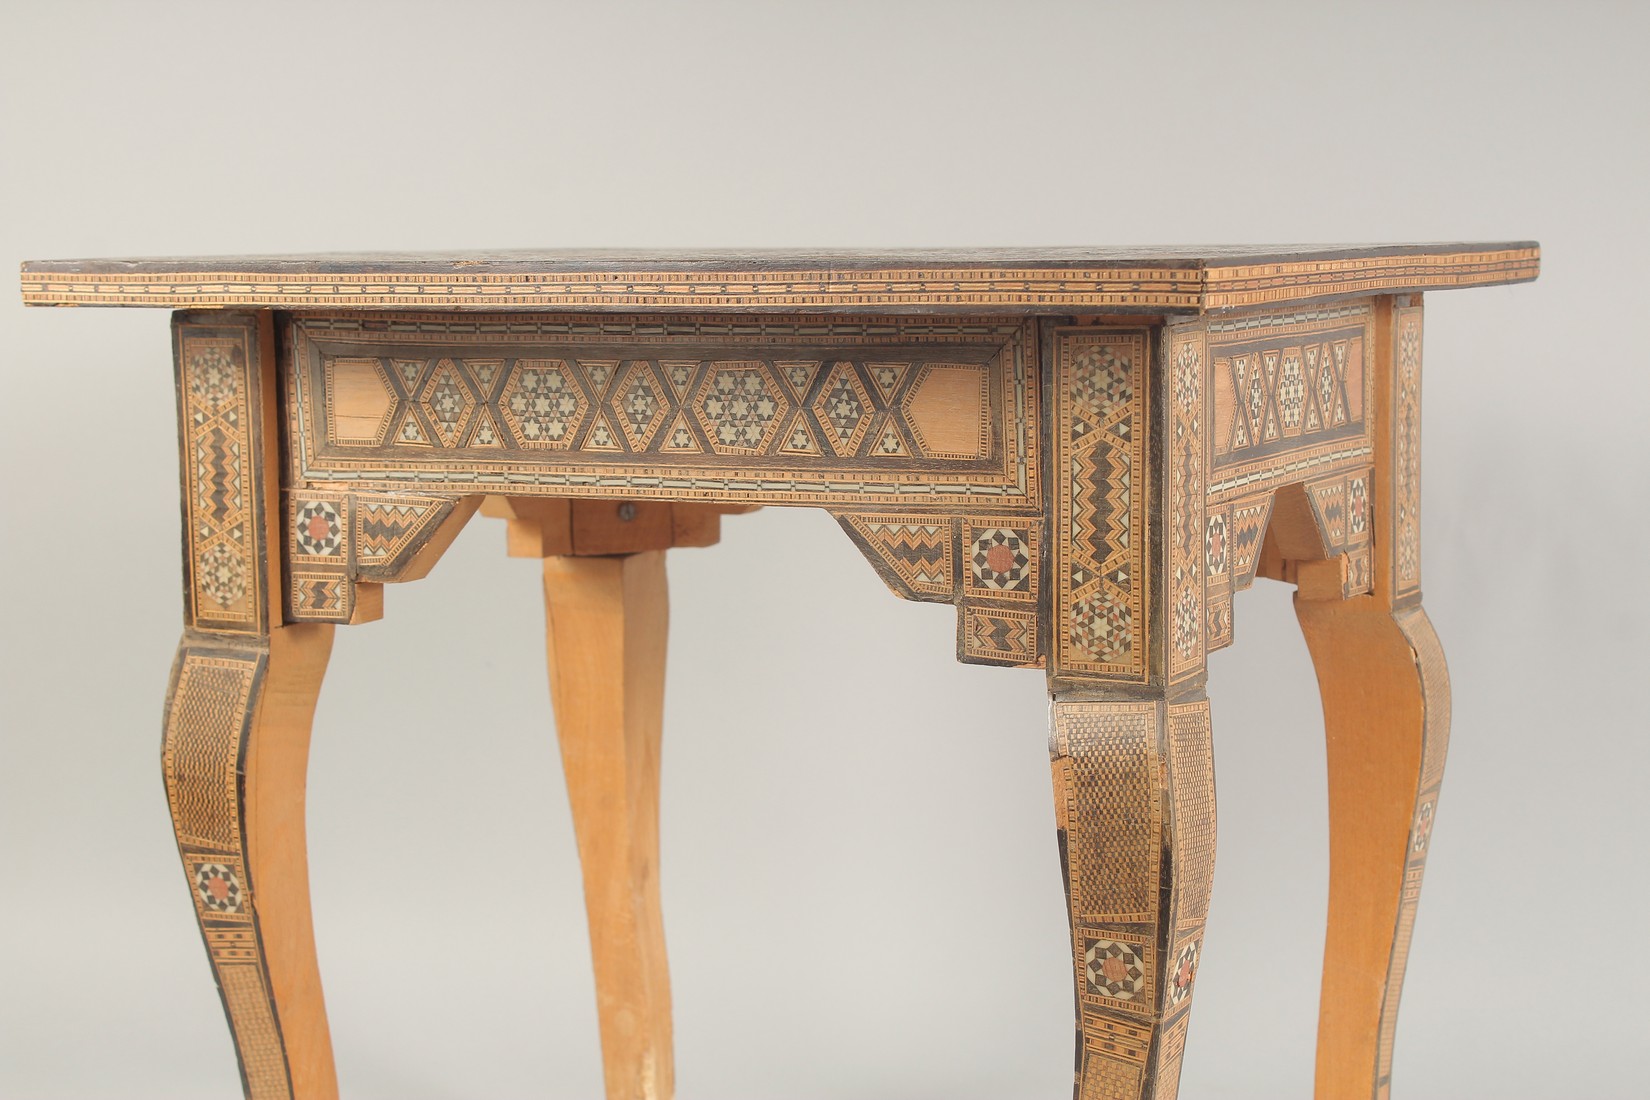 A VERY FINE SYRIAN DAMASCUS BONE INLAID WOODEN TABLE, circa 1900-1920, finely onlaid with - Image 4 of 4